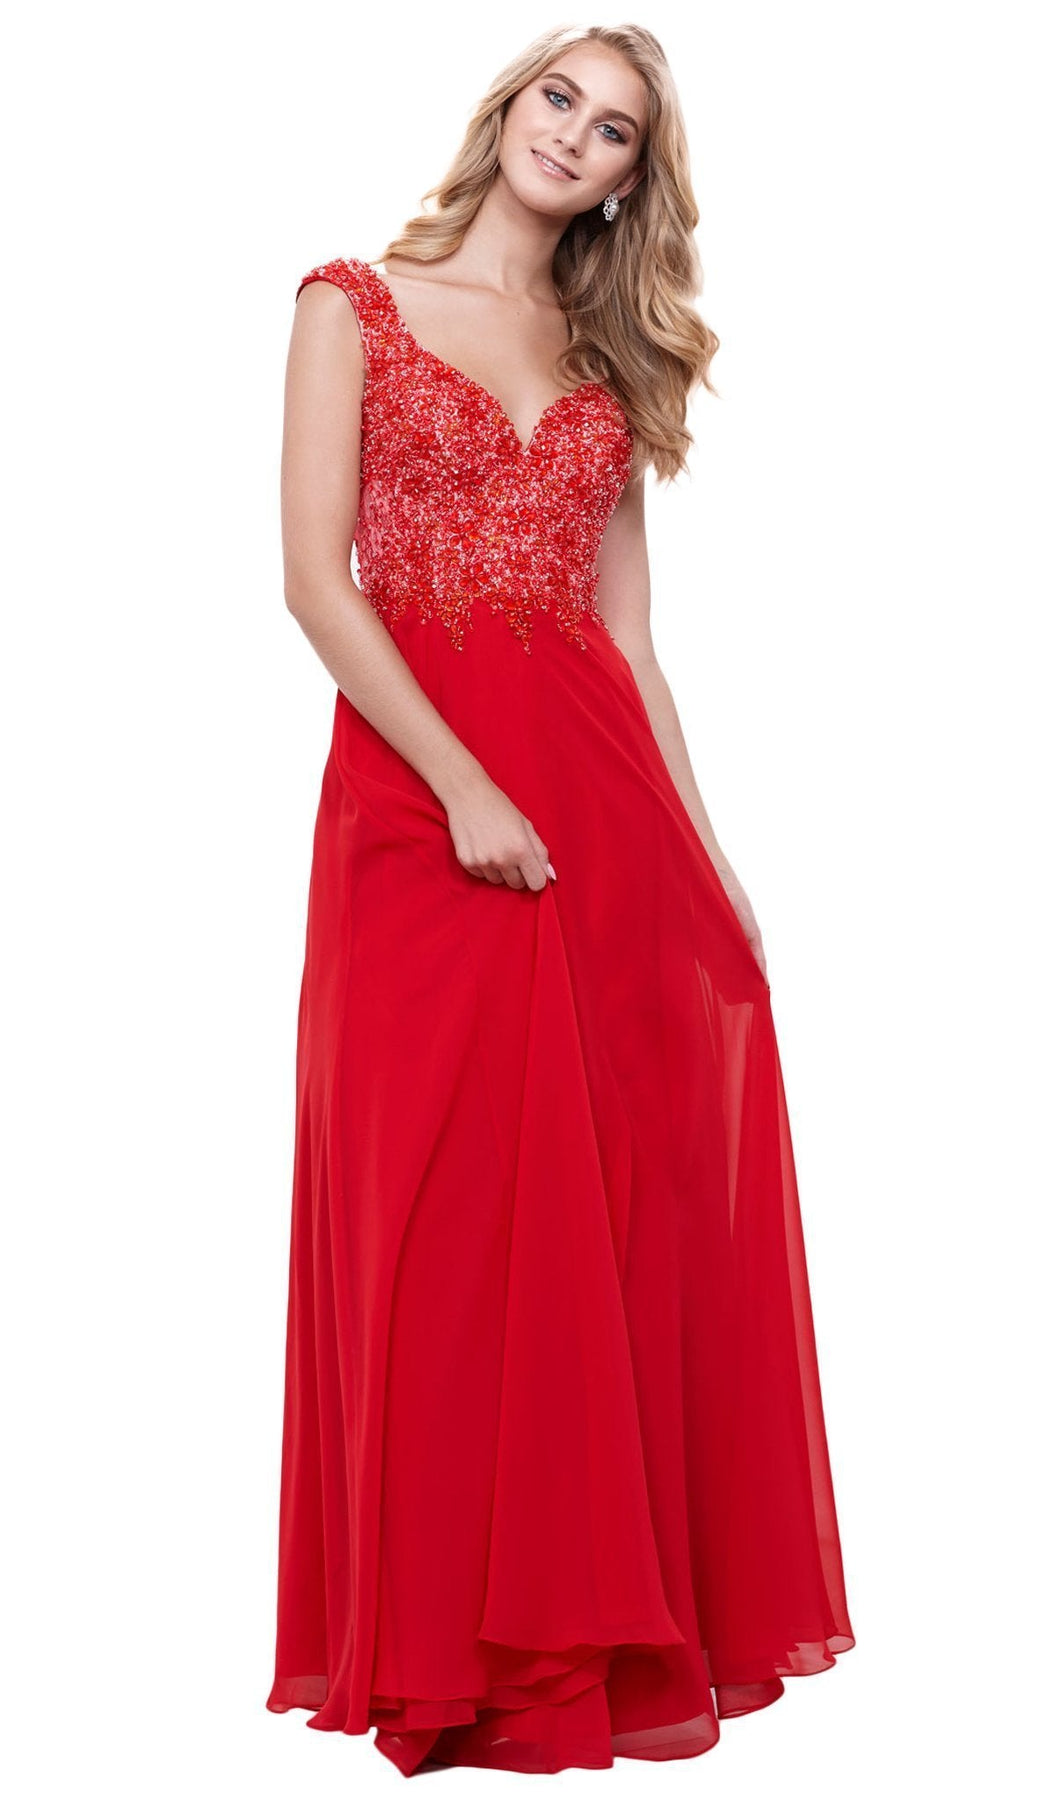 Nox Anabel - 8302 Adorned Lace Bodice Sleeveless Chiffon Dress Special Occasion Dress XS / Red